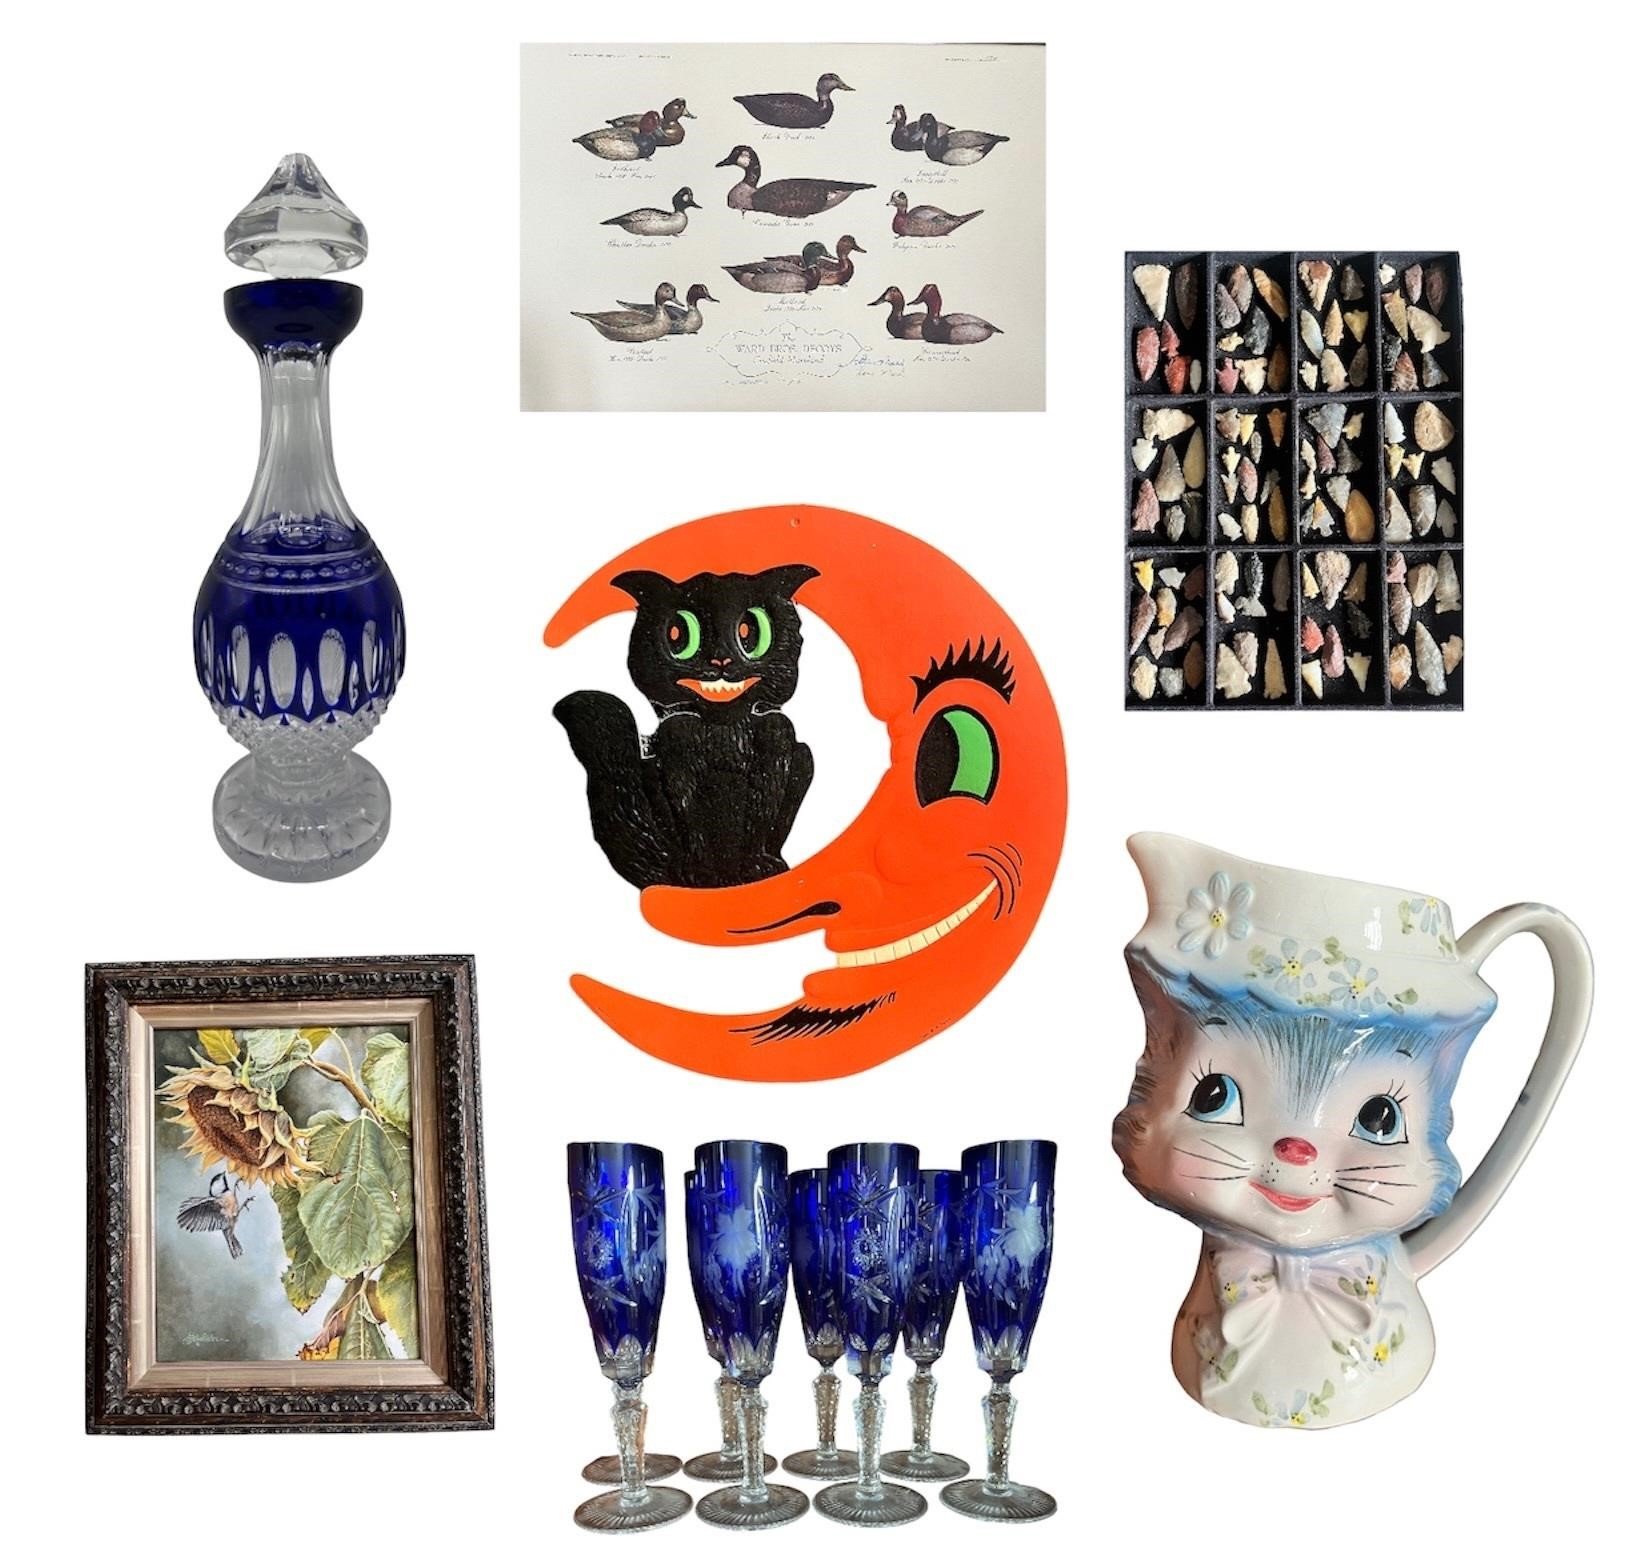 811 lots of Antiques & Collectibles